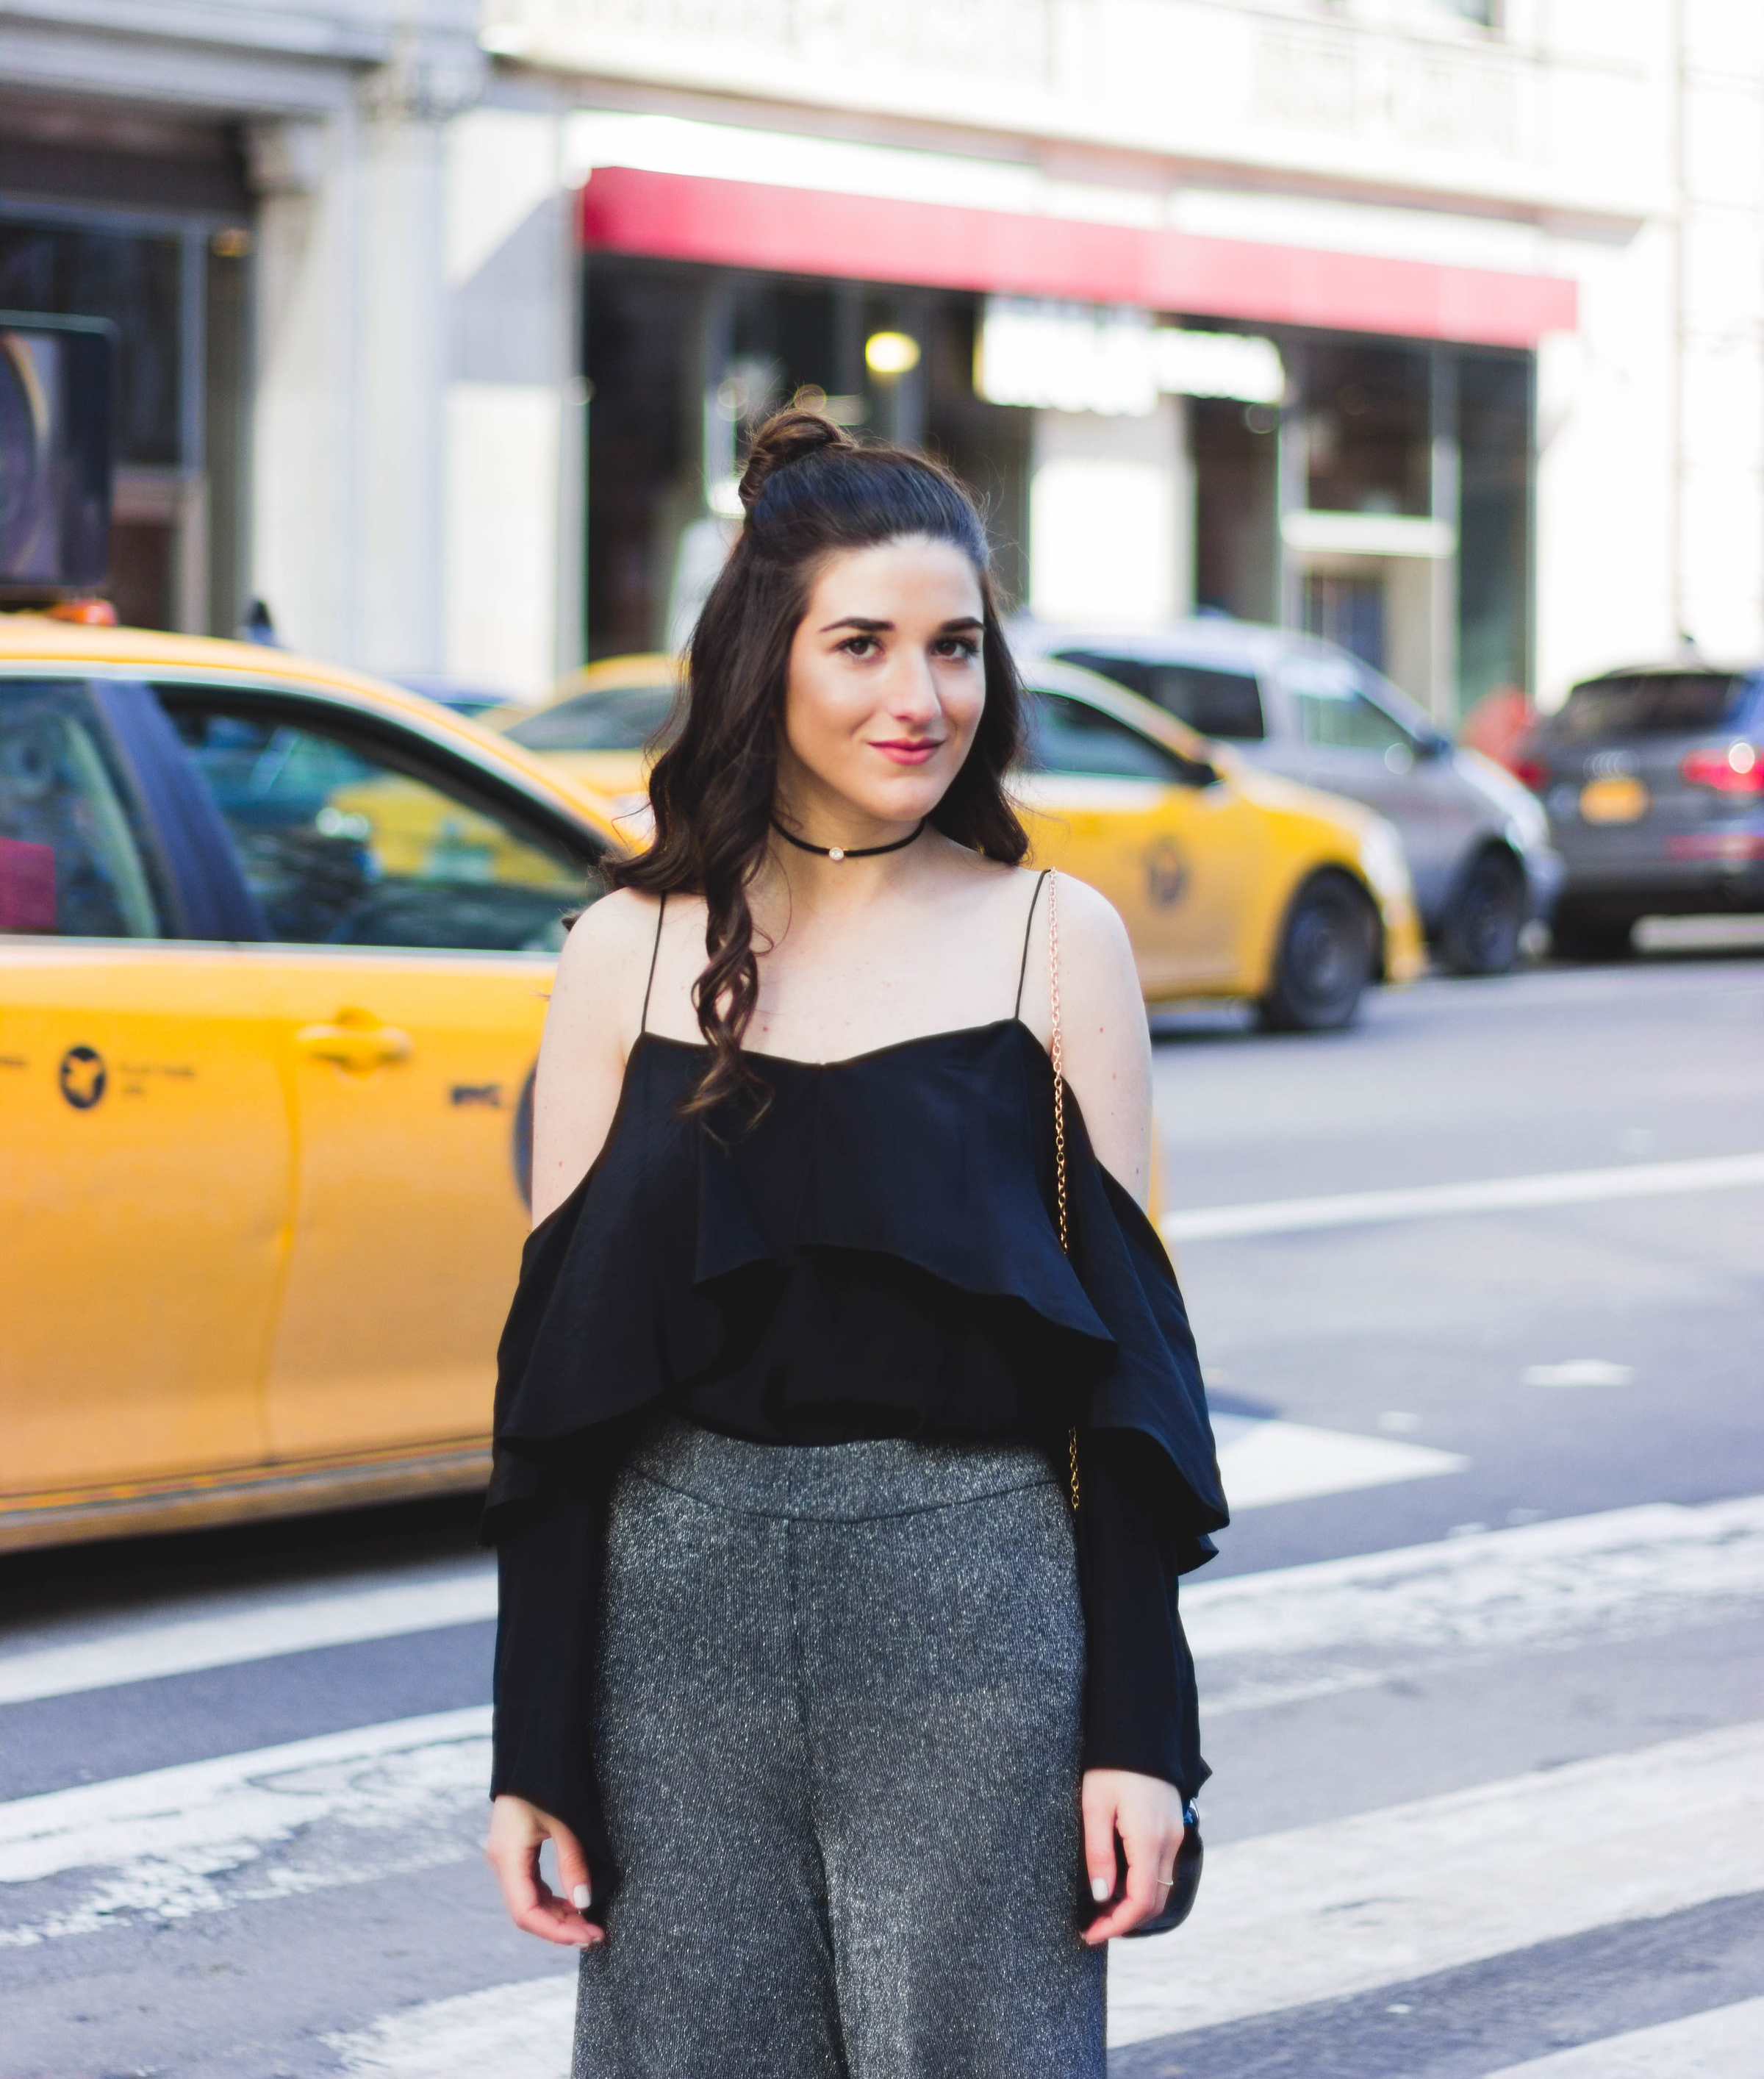 Metallic Pants Black Silk Top How To Find A Photographer Esther Santer Fashion Blog NYC Street Style Blogger Outfit OOTD Trendy Jay Godfrey Lips Clutch Bag Cold Shoulder Jewel Choker Tassel Slides Hair Topknot Girl Photoshoot Women Summer Shop Wearing.jpg